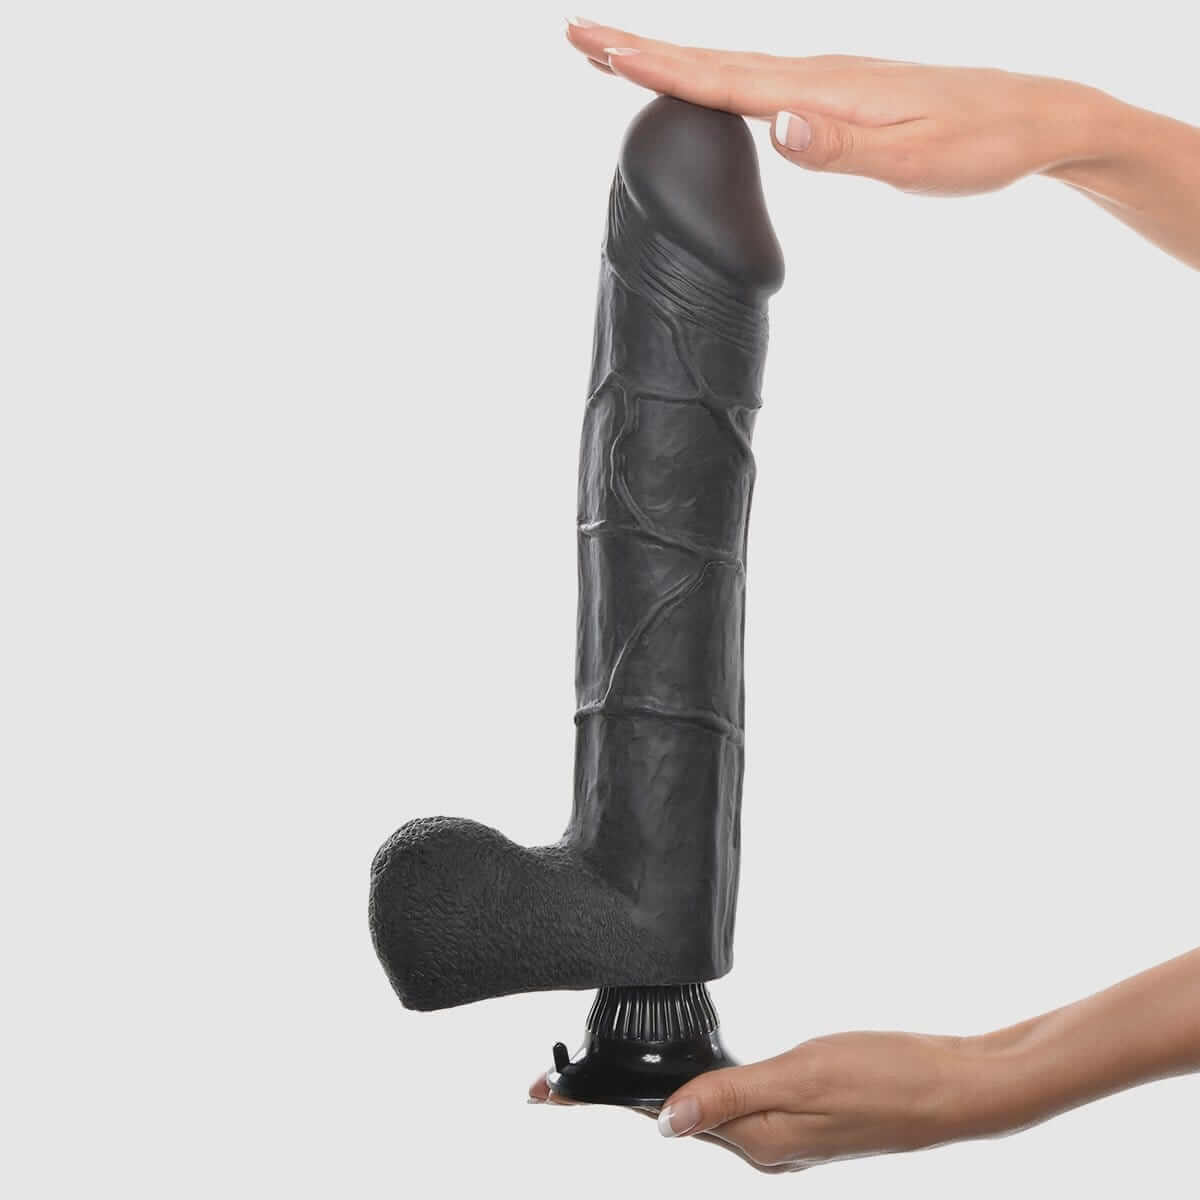 Real Feel Deluxe No.12 - 12" Black Dildo - Thorn & Feather